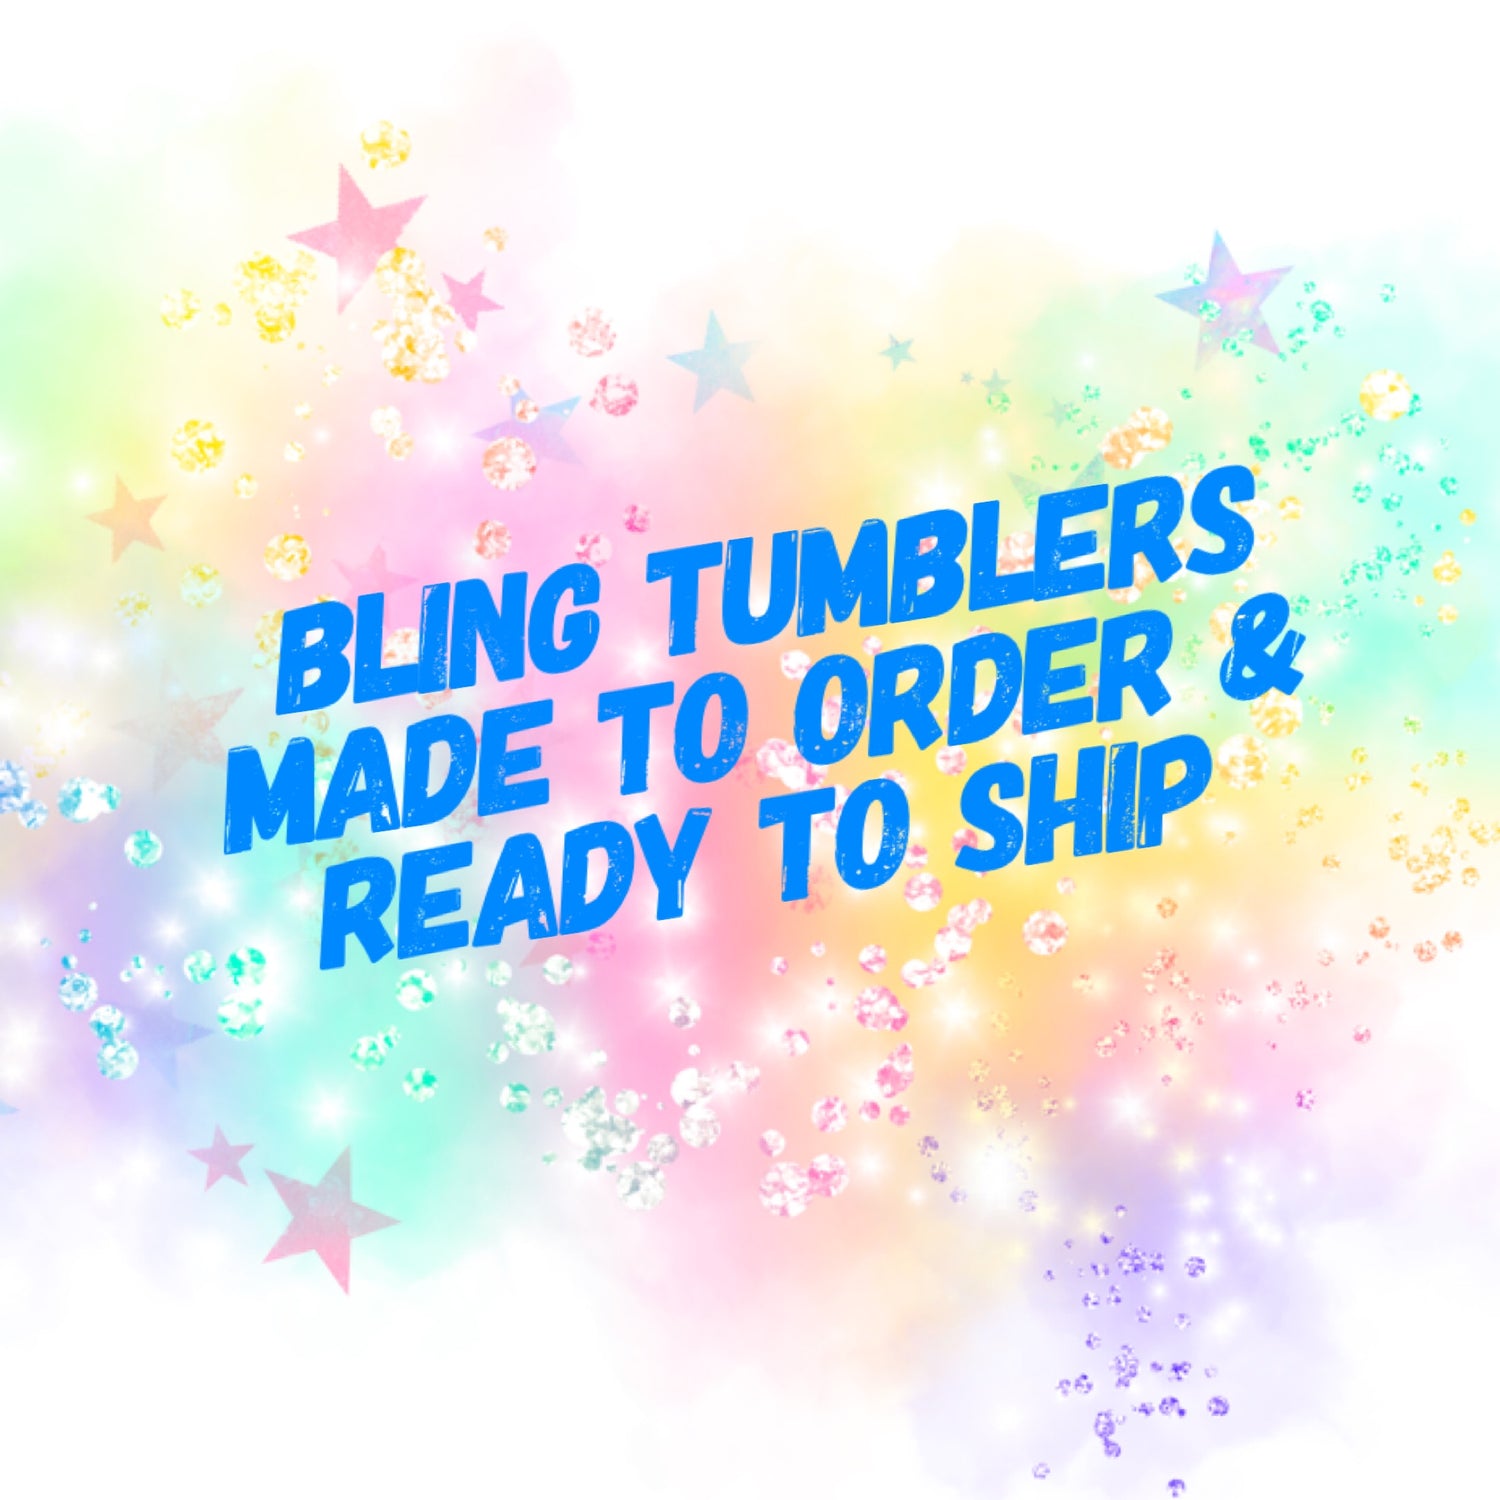 Made to Order & Ready to Ship Bling Tumblers